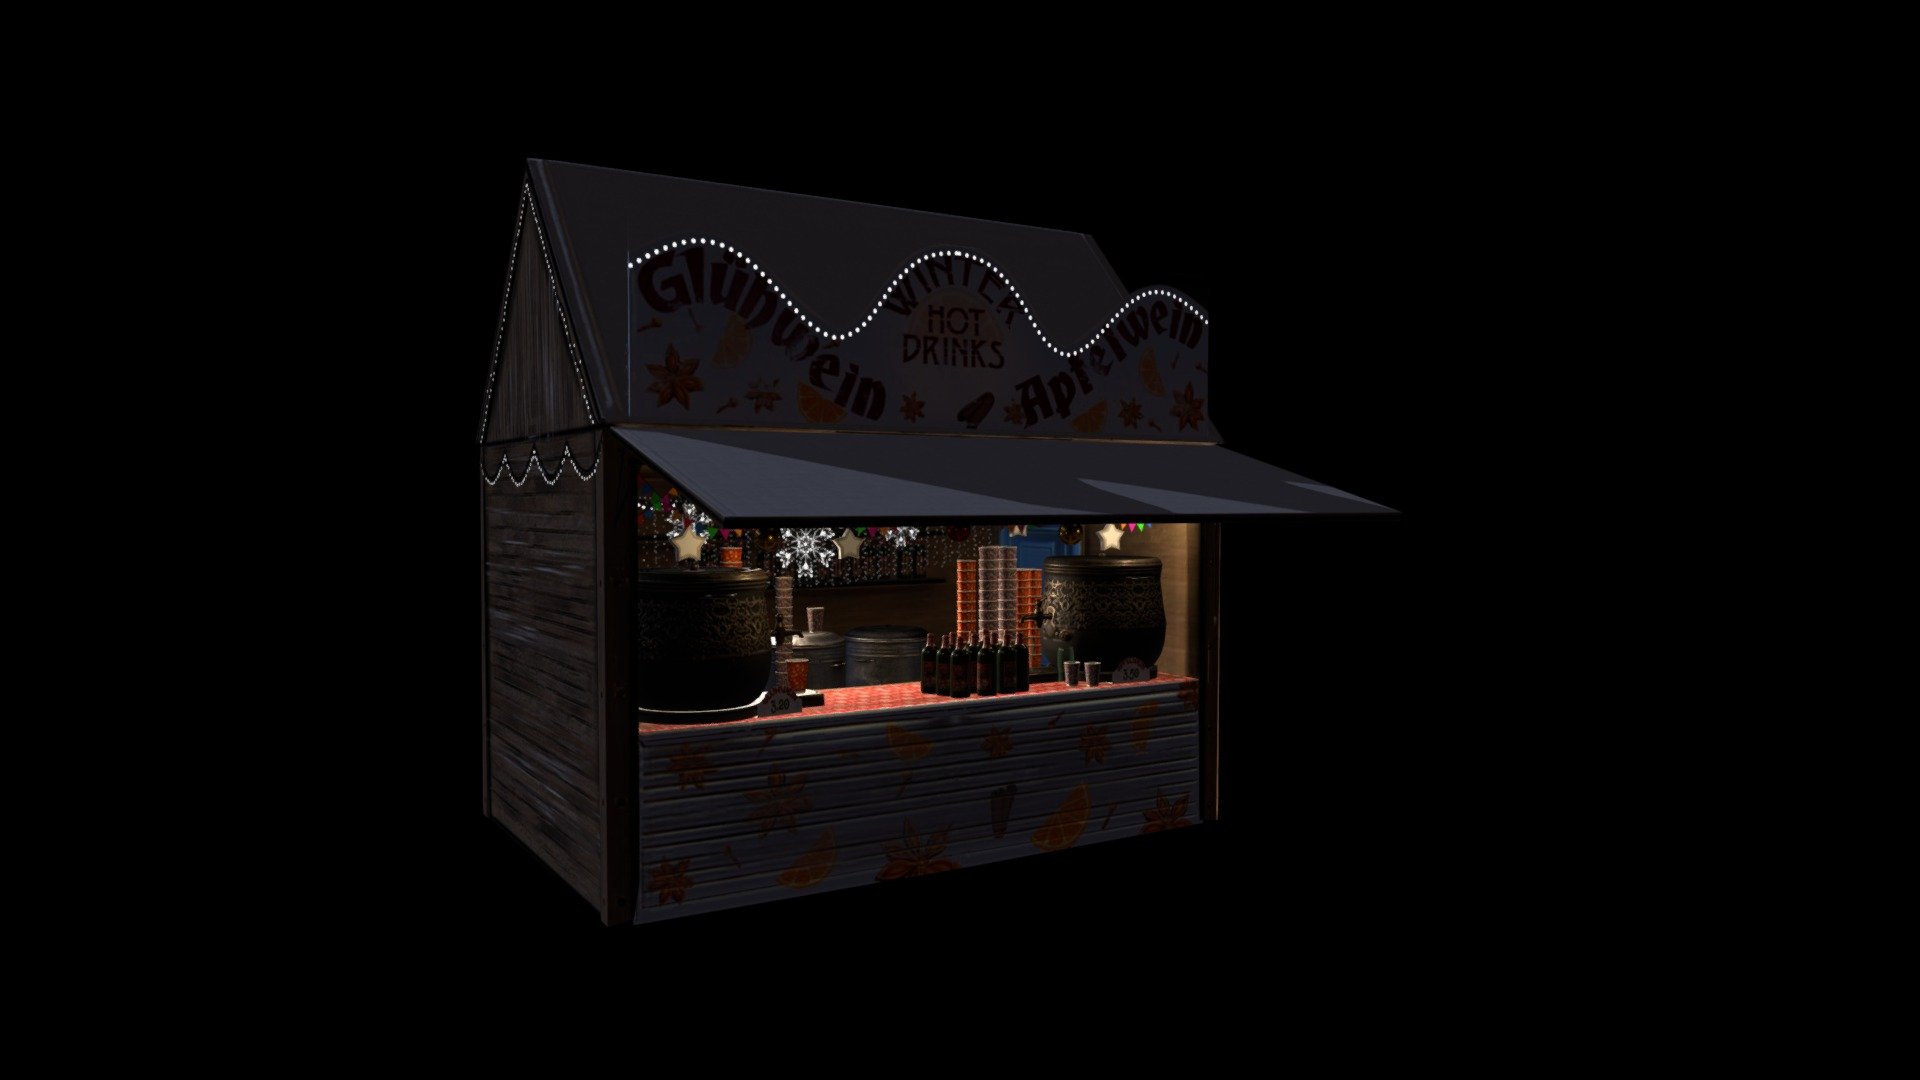 Christmas Market Gluhwein Chalet- is one of the 6 Chalets of the Christmas Market asset. Almost all models have Diffuse, Normal, Gloss and Specular maps. Some models as chalet itself and Xmas lights have also Emission maps and transperency maps. All models are made in OBJ, FBX and 3dsMax formats. This models set will suit for Christmas projects and not only. Demo Video:https://www.youtube.com/watch?v=f-ZwfqrEijE - Christmas Market Gluhwein Chalet - Buy Royalty Free 3D model by Vaarg 3d model